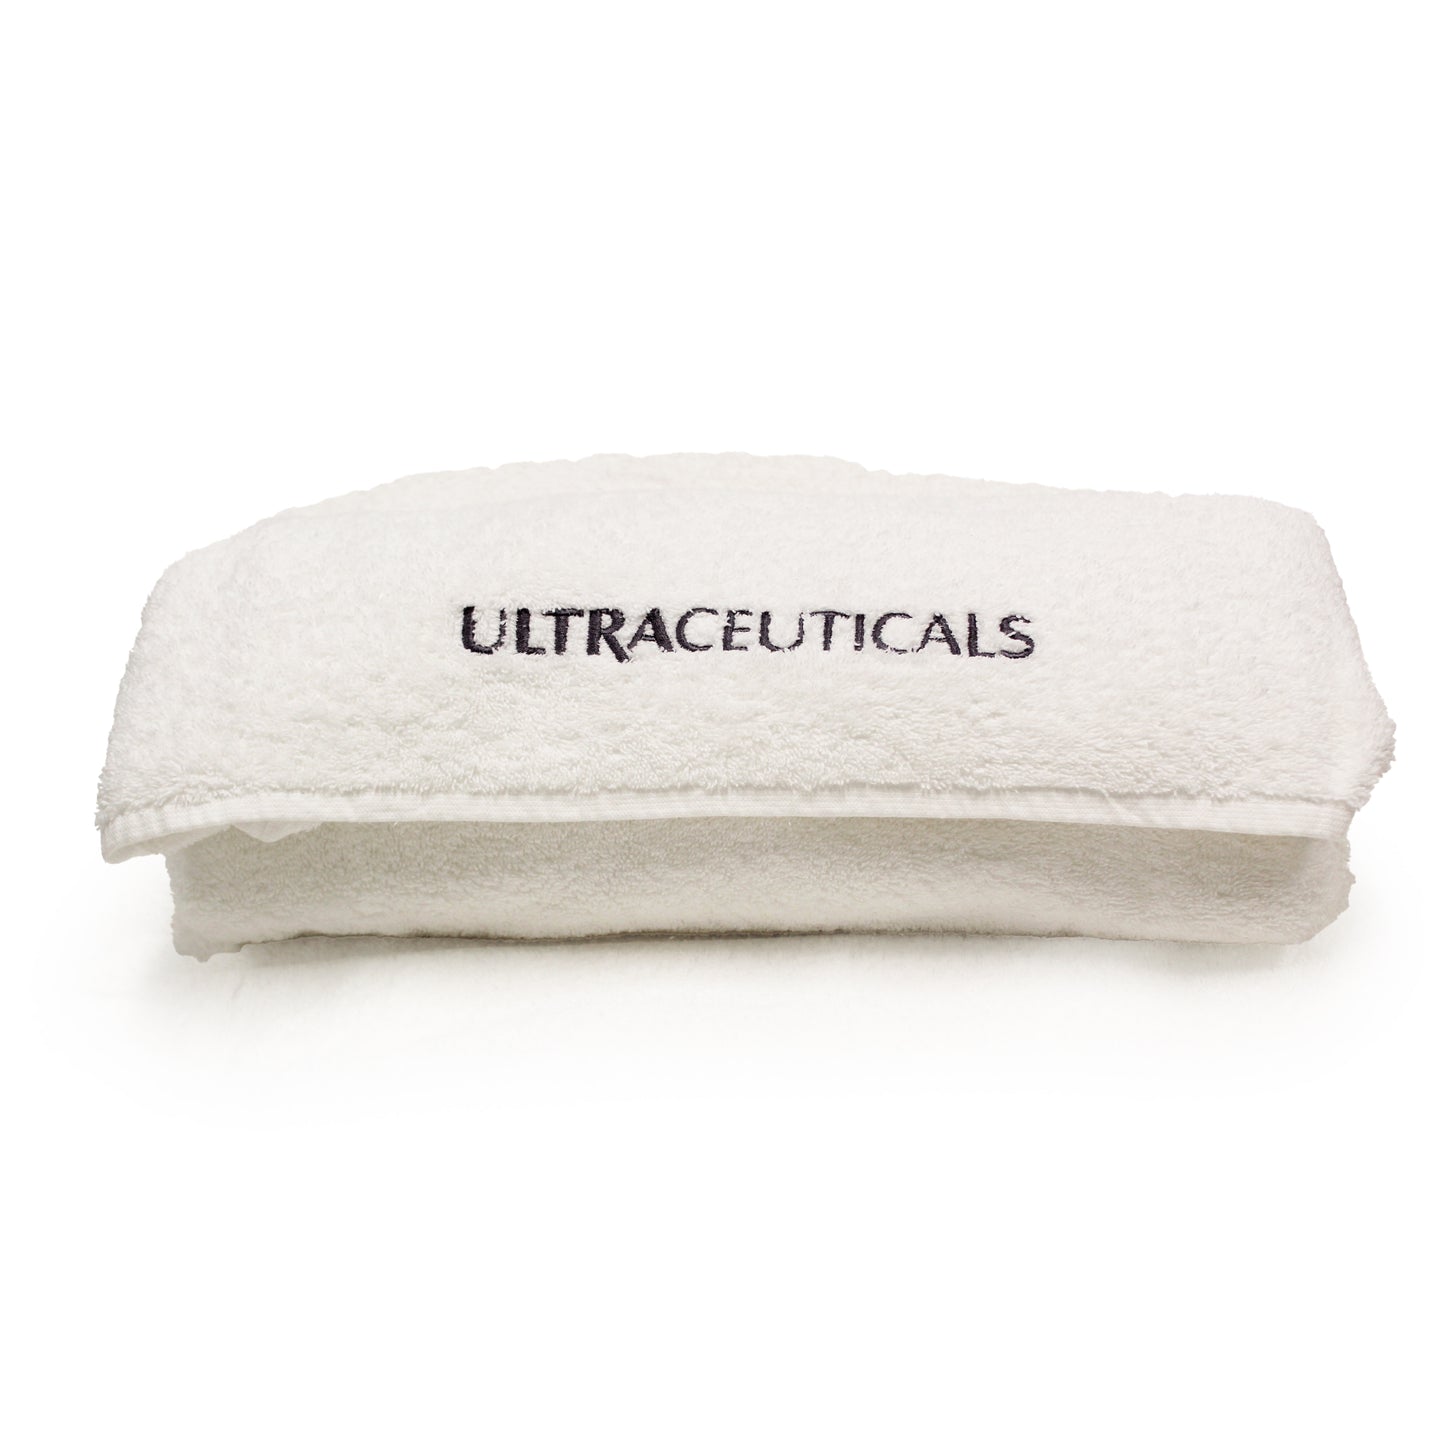 Ultraceutical Hand Towel